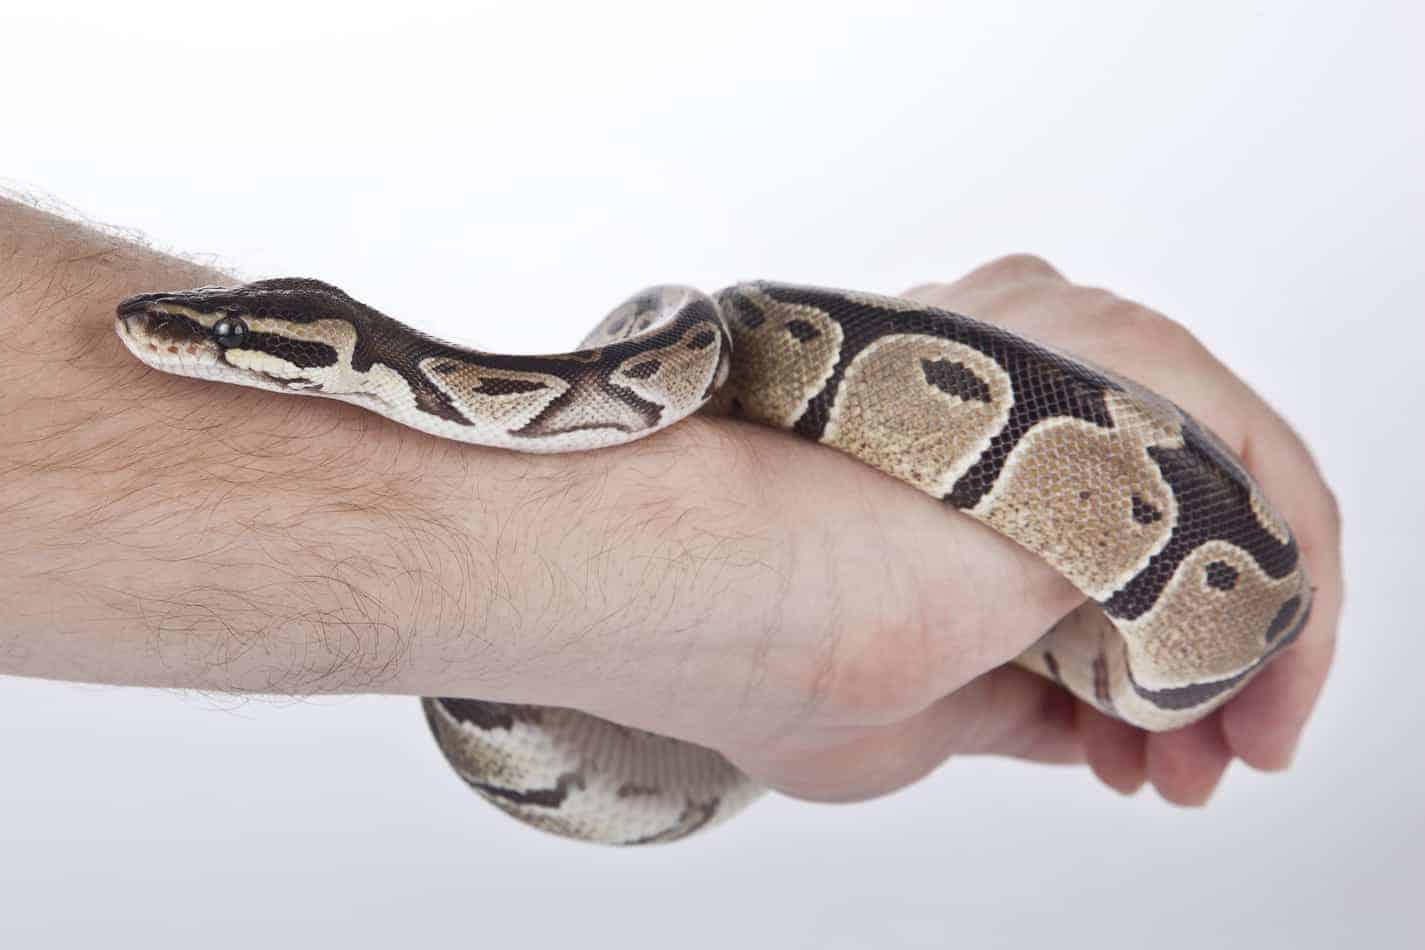 Buyers guide the best enclosures for ball pythons 1 Buyer's Guide: Best Enclosures for Ball Pythons